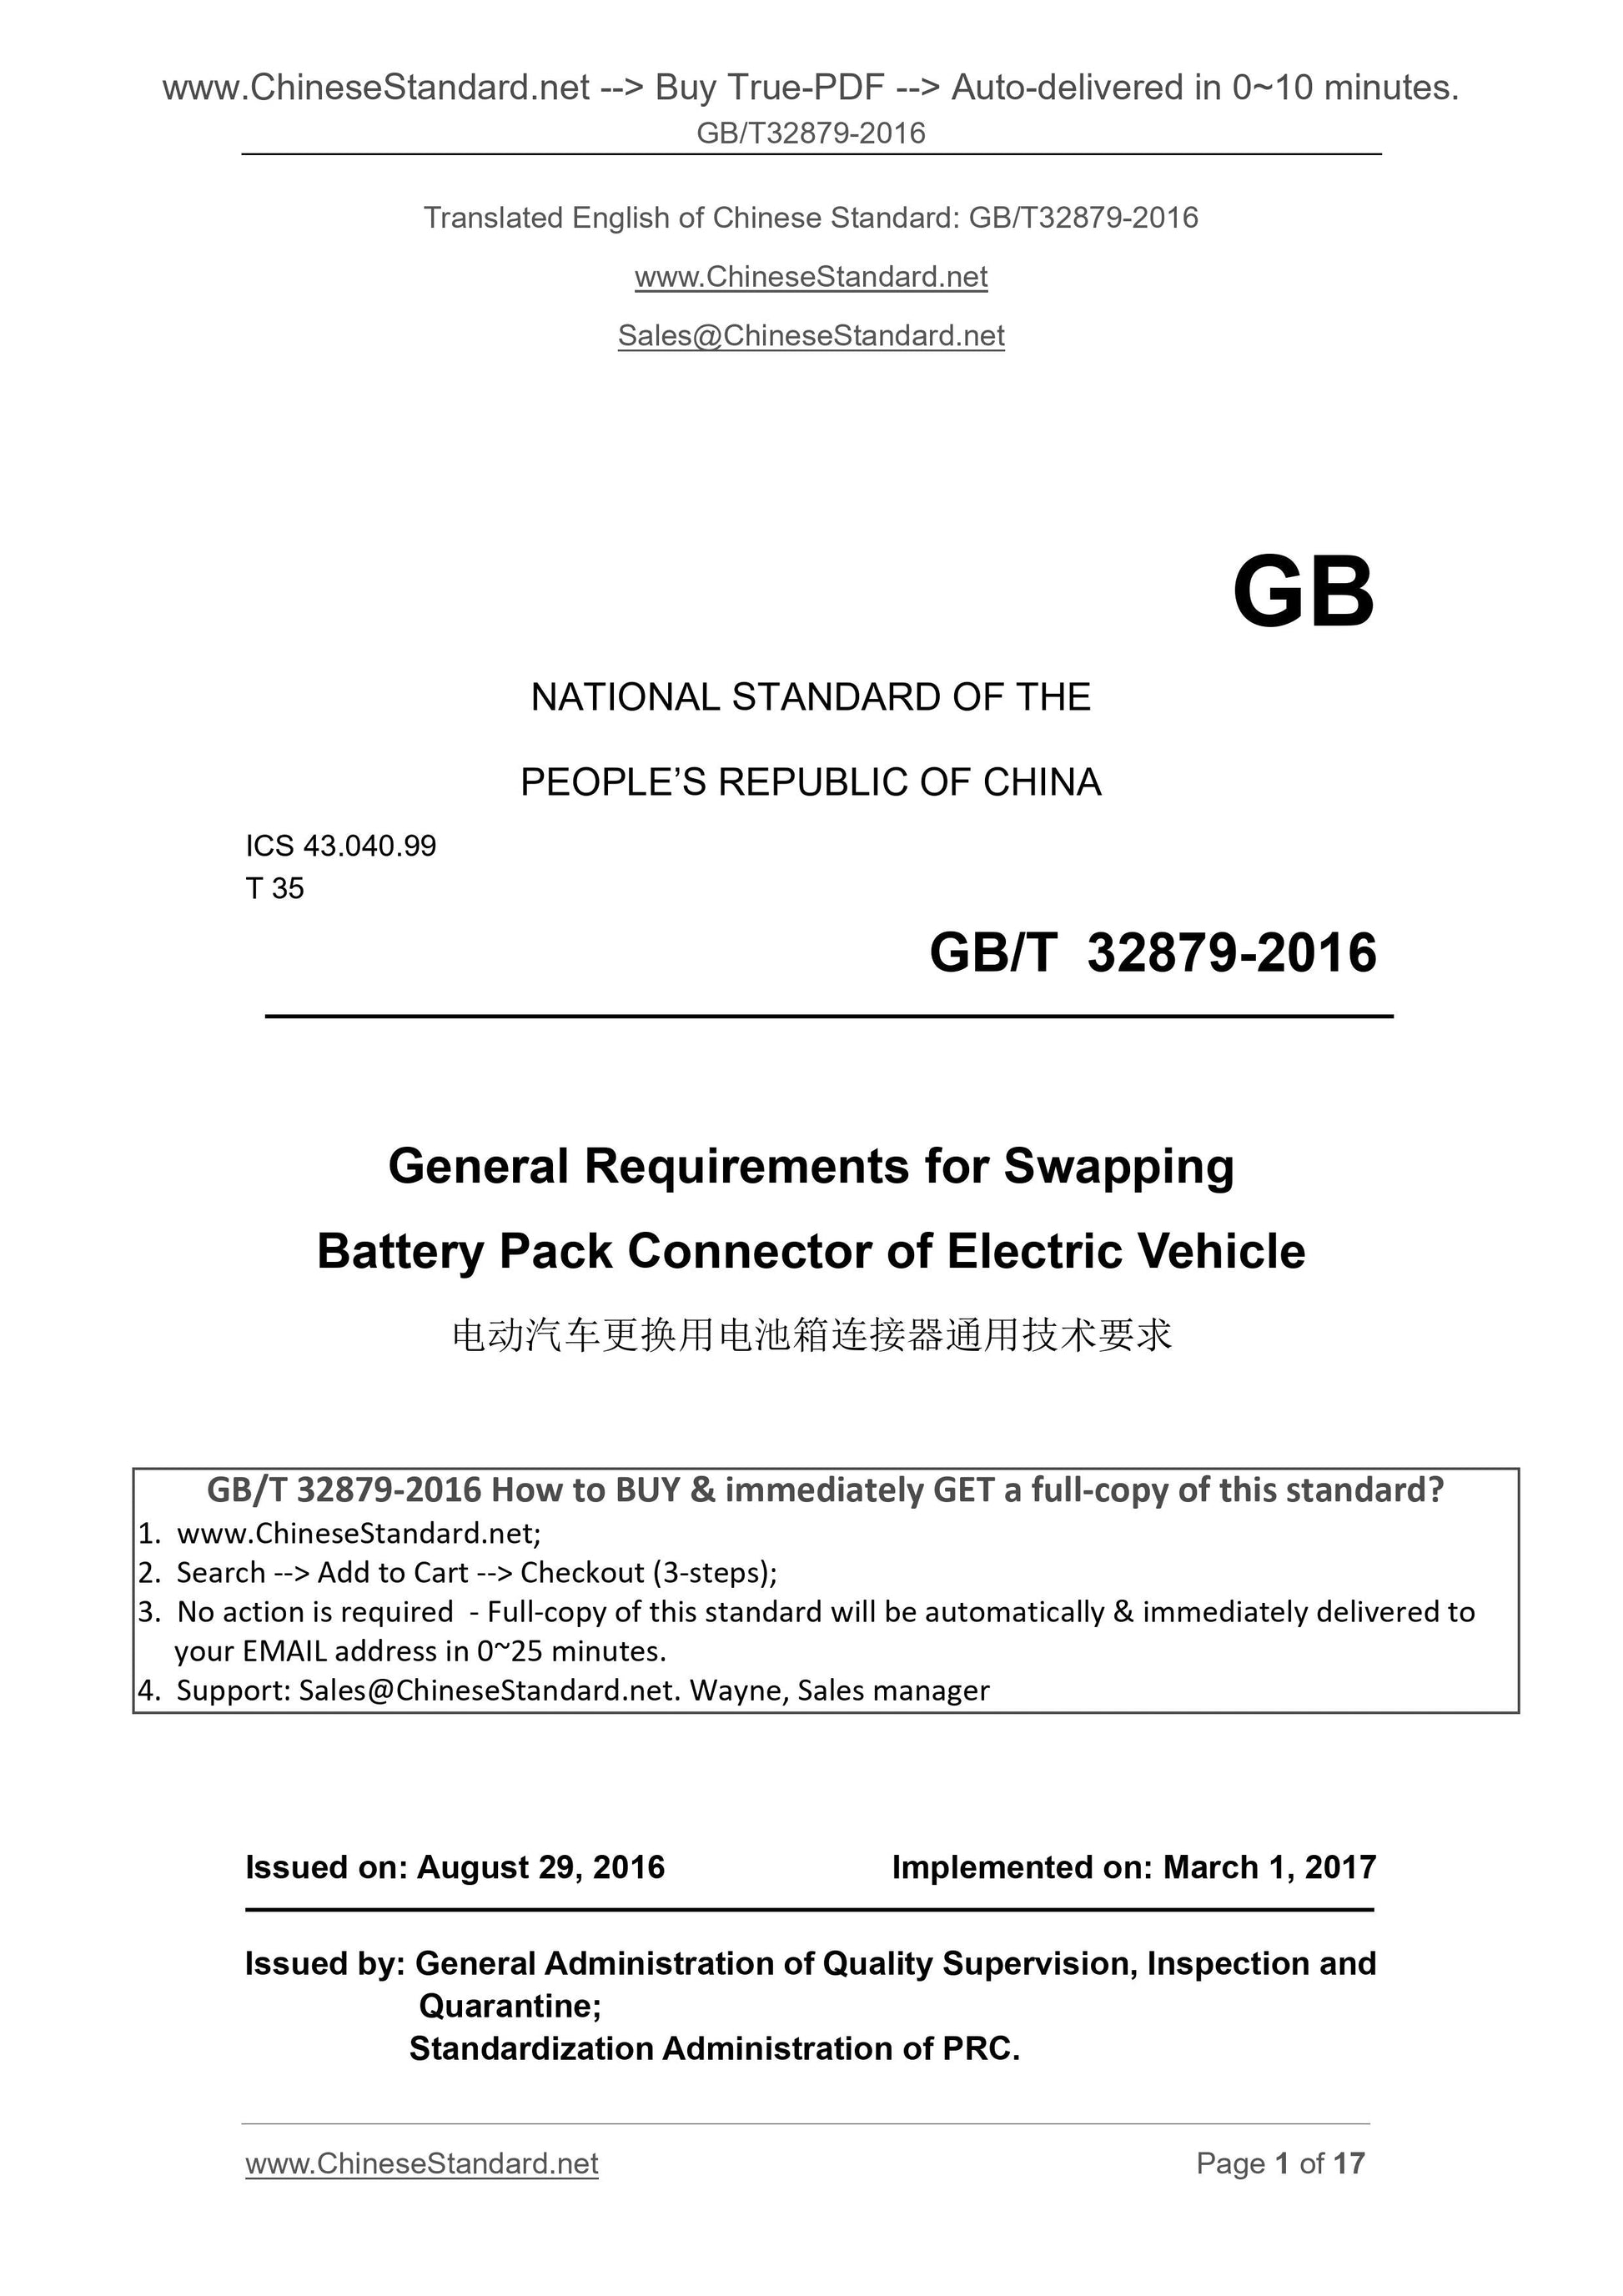 GB/T 32879-2016 Page 1